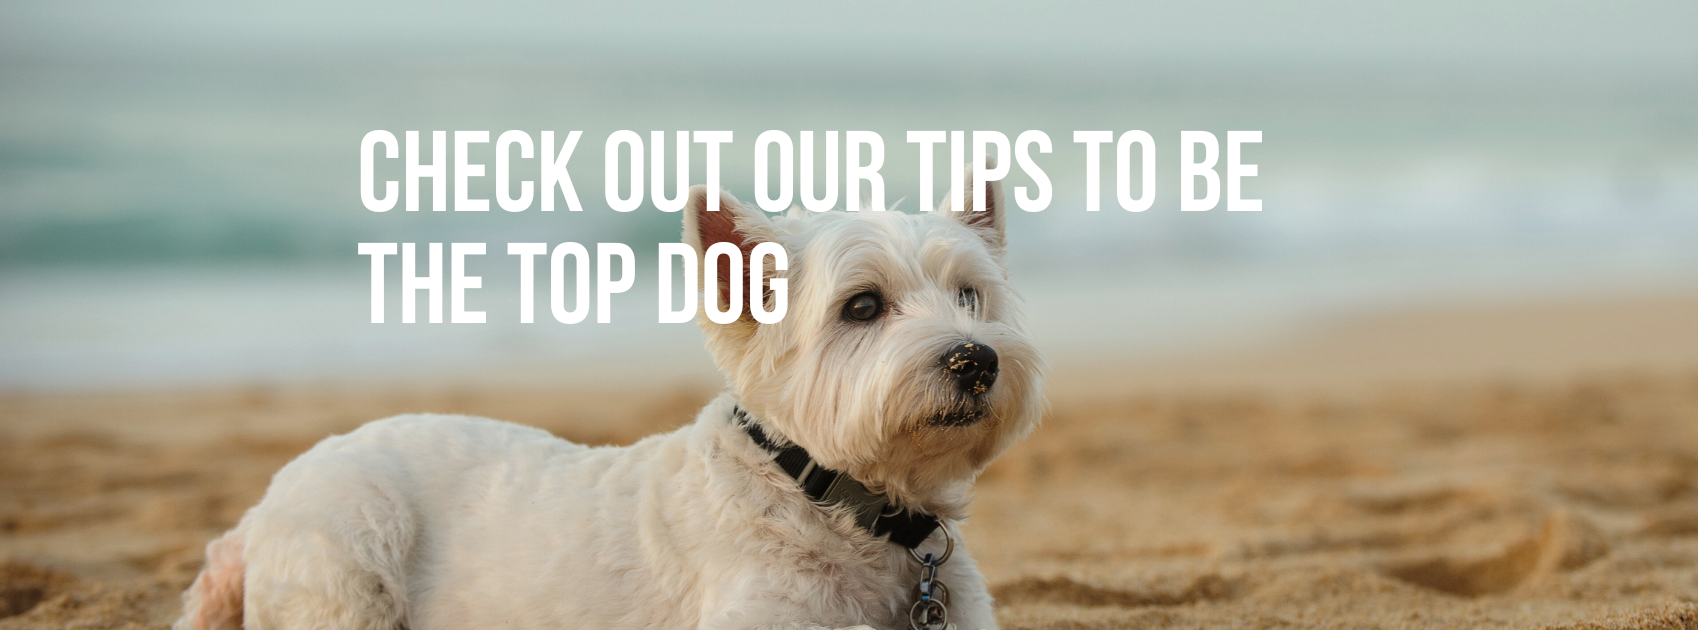 CHECK OUT OUR TIPS TO BE THE TOP DOG